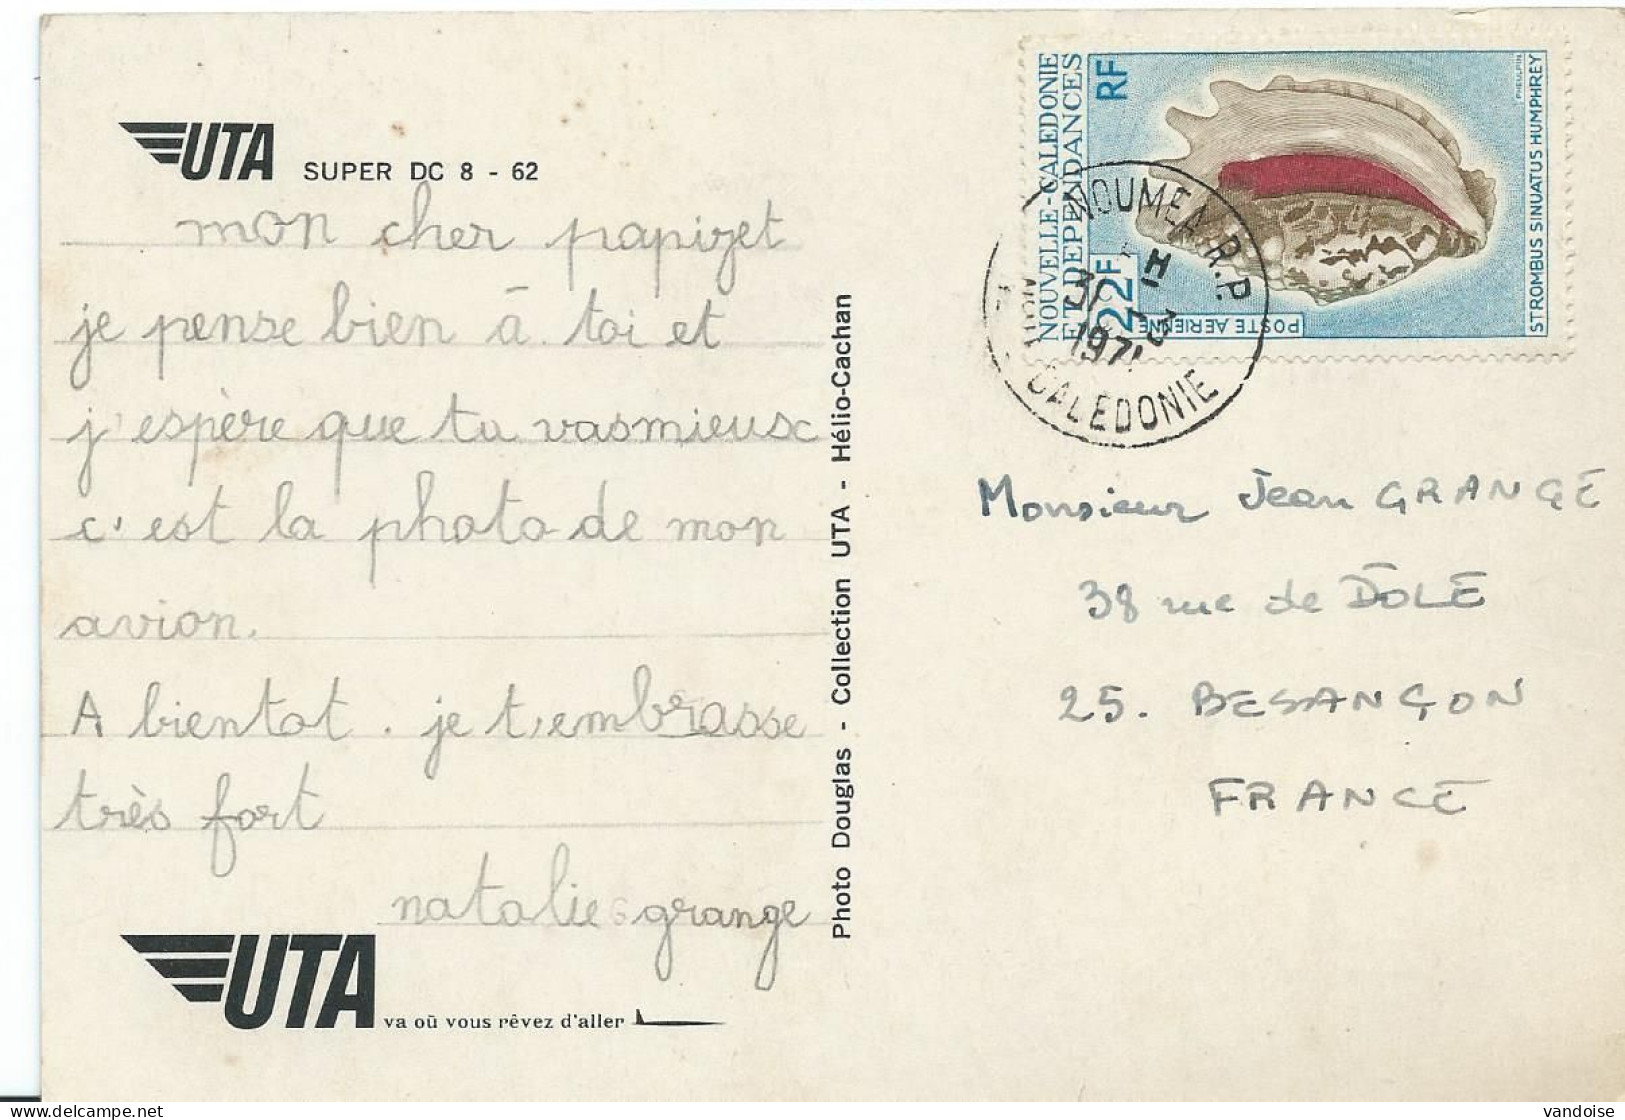 CARTE POSTALE 1971 AVEC TIMBRE A 22 FR COQUILLAGE - Lettres & Documents